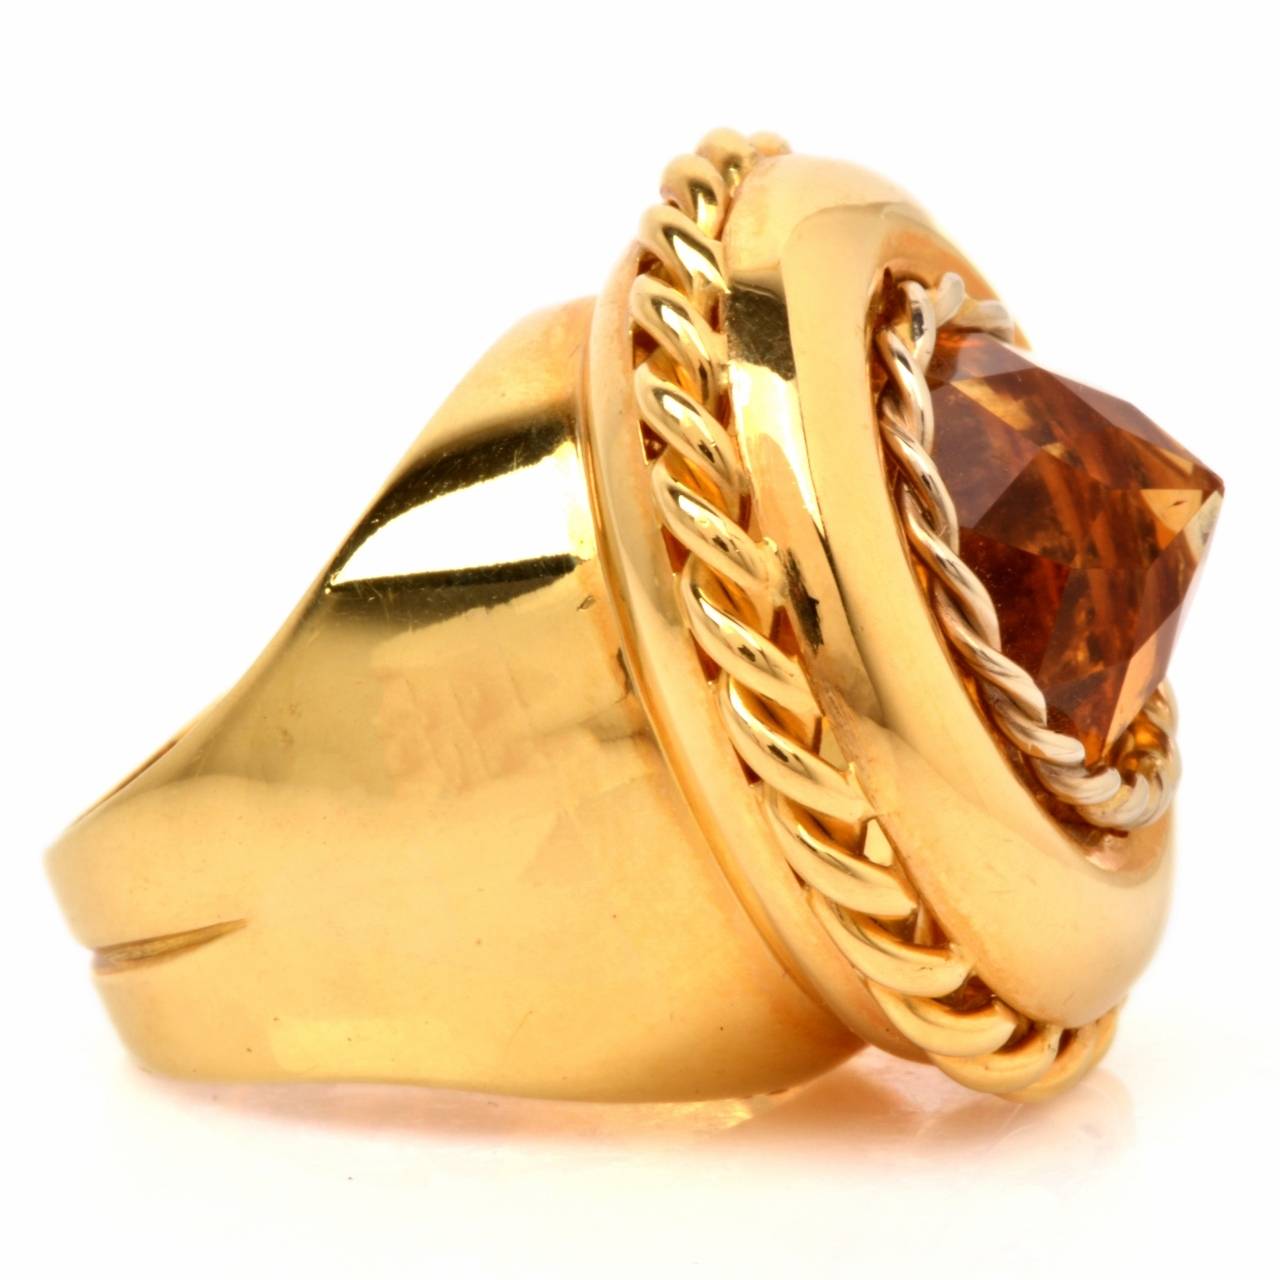 This opulent and impressive estate ring from the Retro era is crafted in solid 18K yellow gold and  weighs 18.8 grams. Inspired by the popular Medieval rings often set with semi-precious gemstones atop a sizable round plaque, this impressive estate